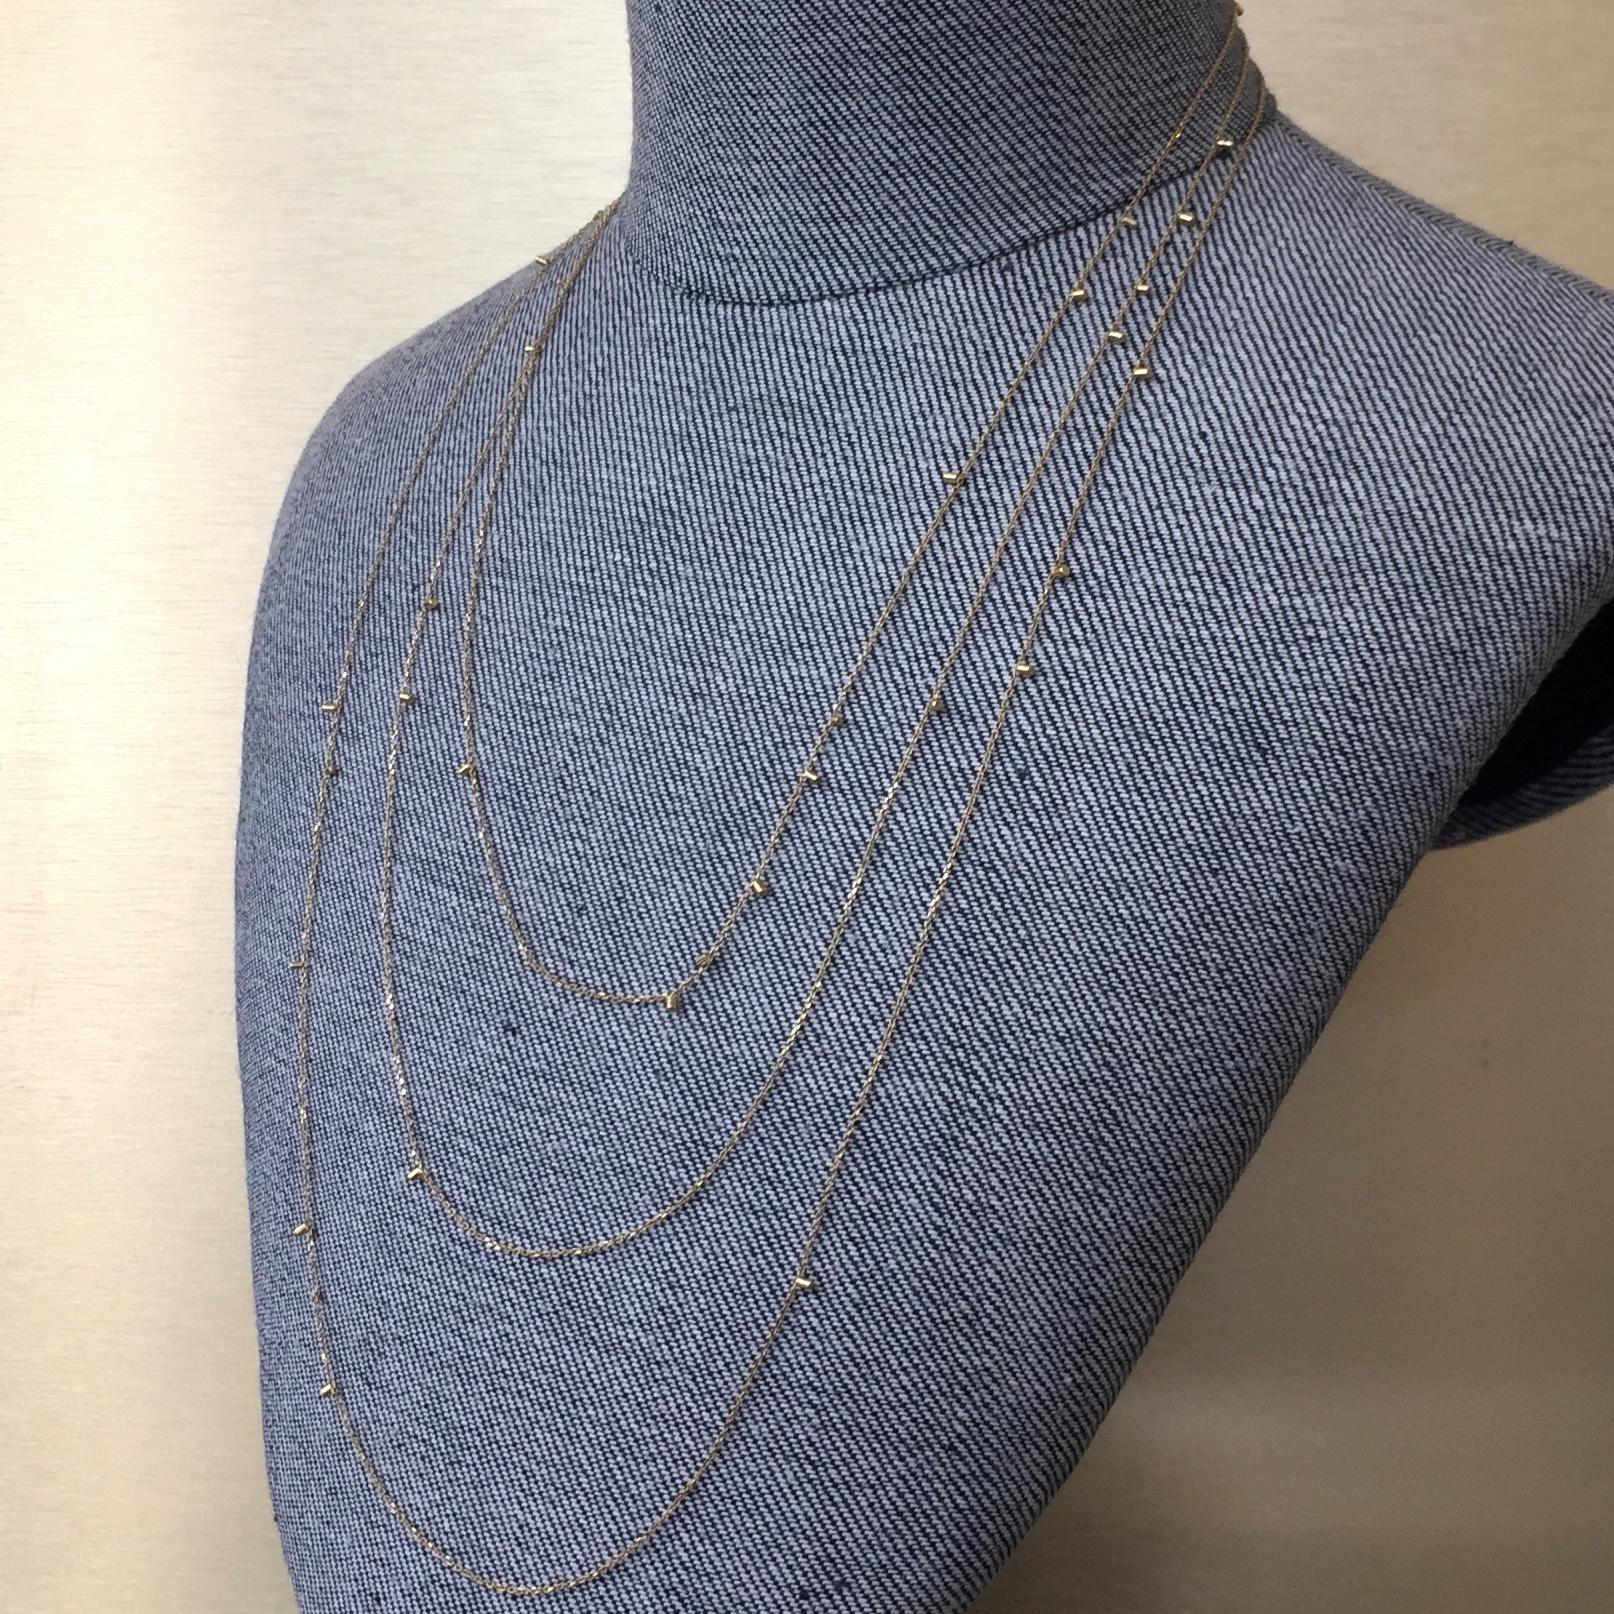 This 18k yellow gold fine long chain necklace is a classic from Sweet Pea's most popular collection; Gold Dust. This necklace is 140cm long but can be ordered in any required length. Please note the image shows the necklace as though it was being